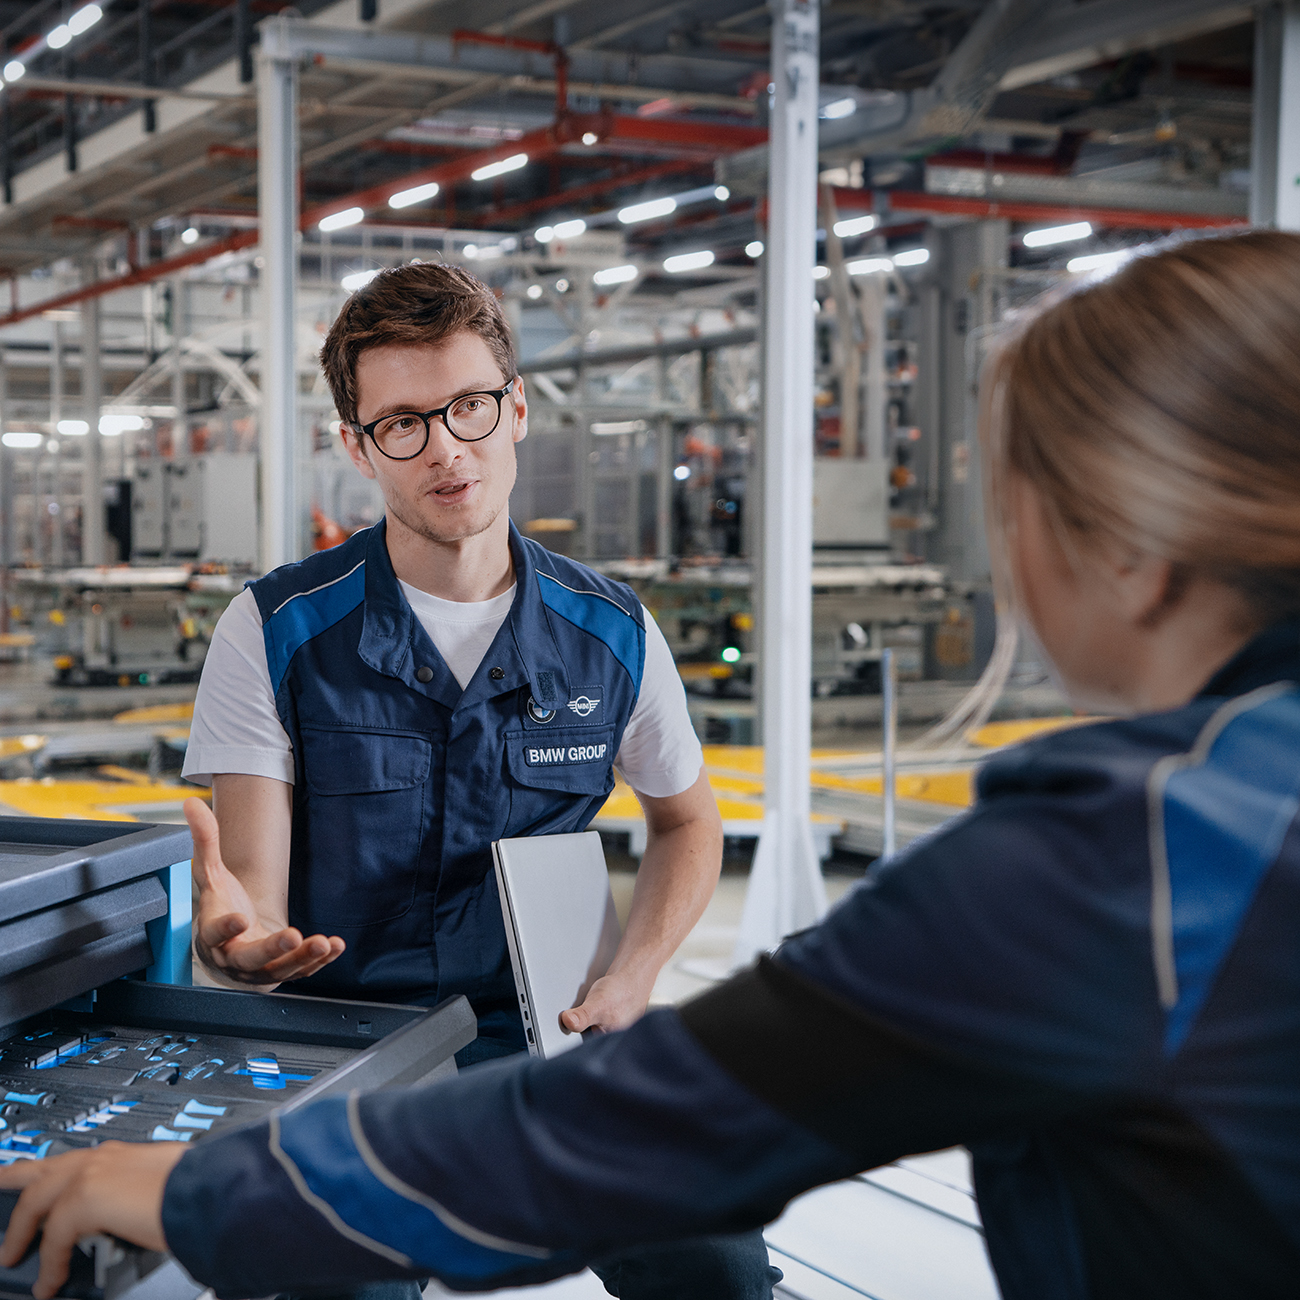 A BMW Group working student in production is having a chat with a colleague.